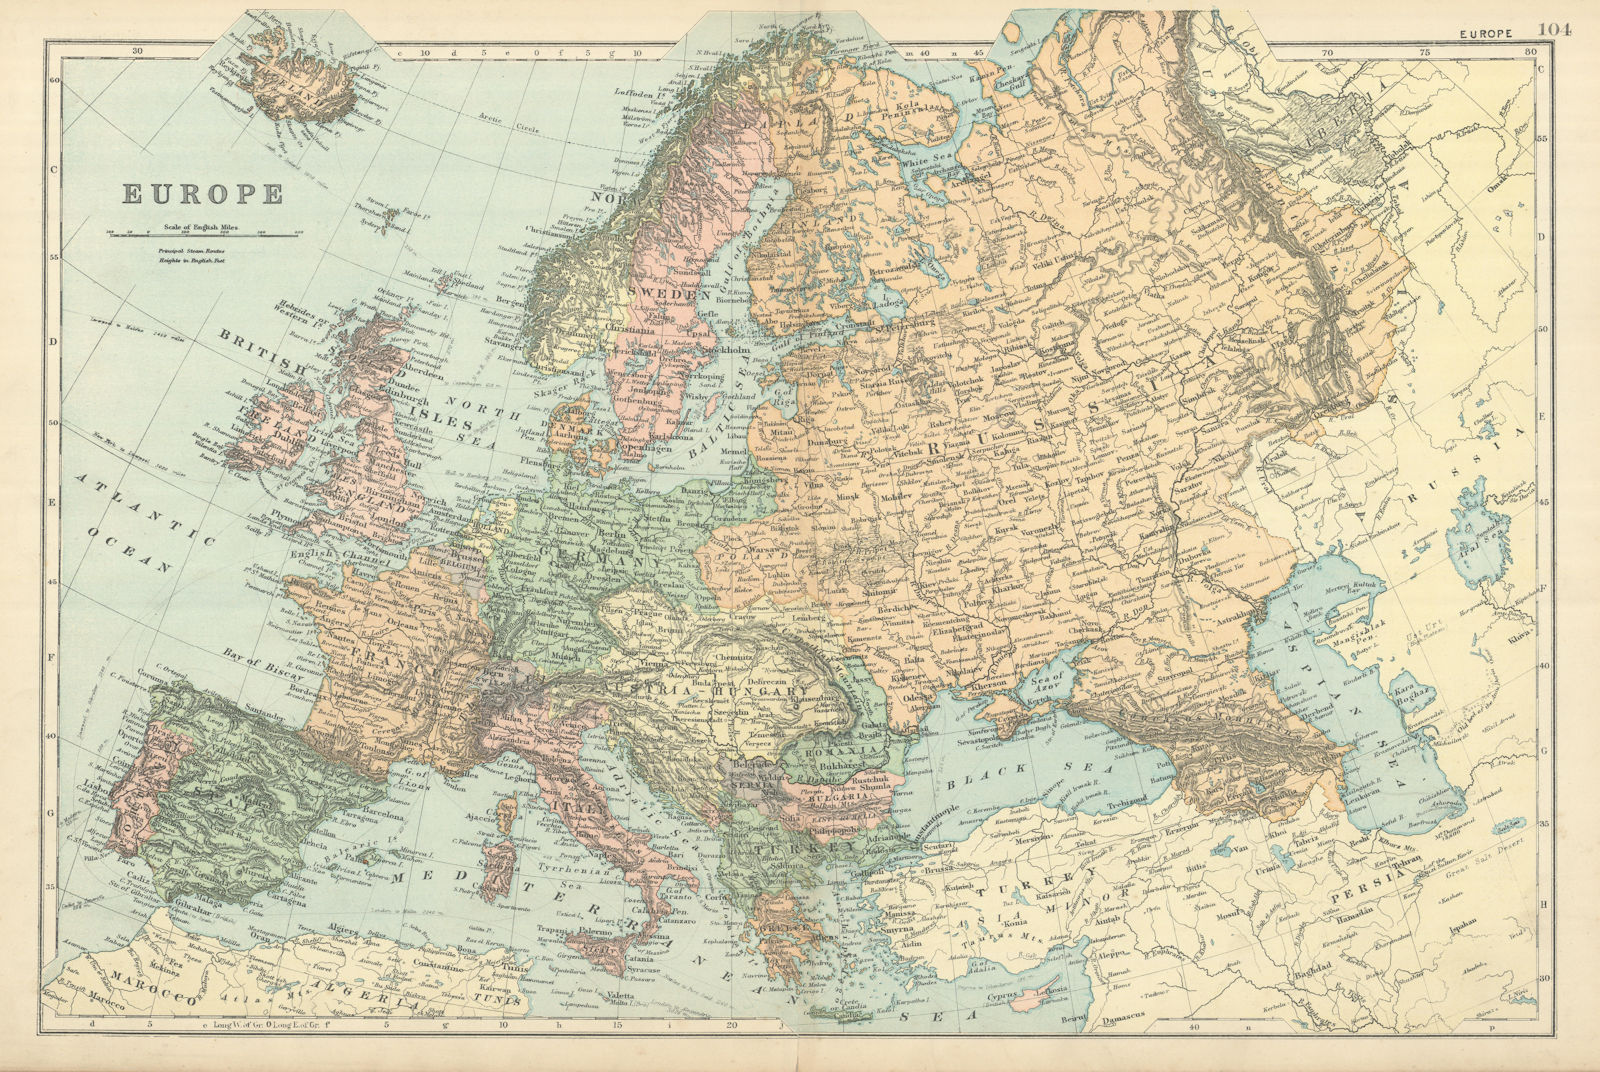 EUROPE. Great Powers. Austria-Hungary Turkey in Europe. GW BACON 1898 old map